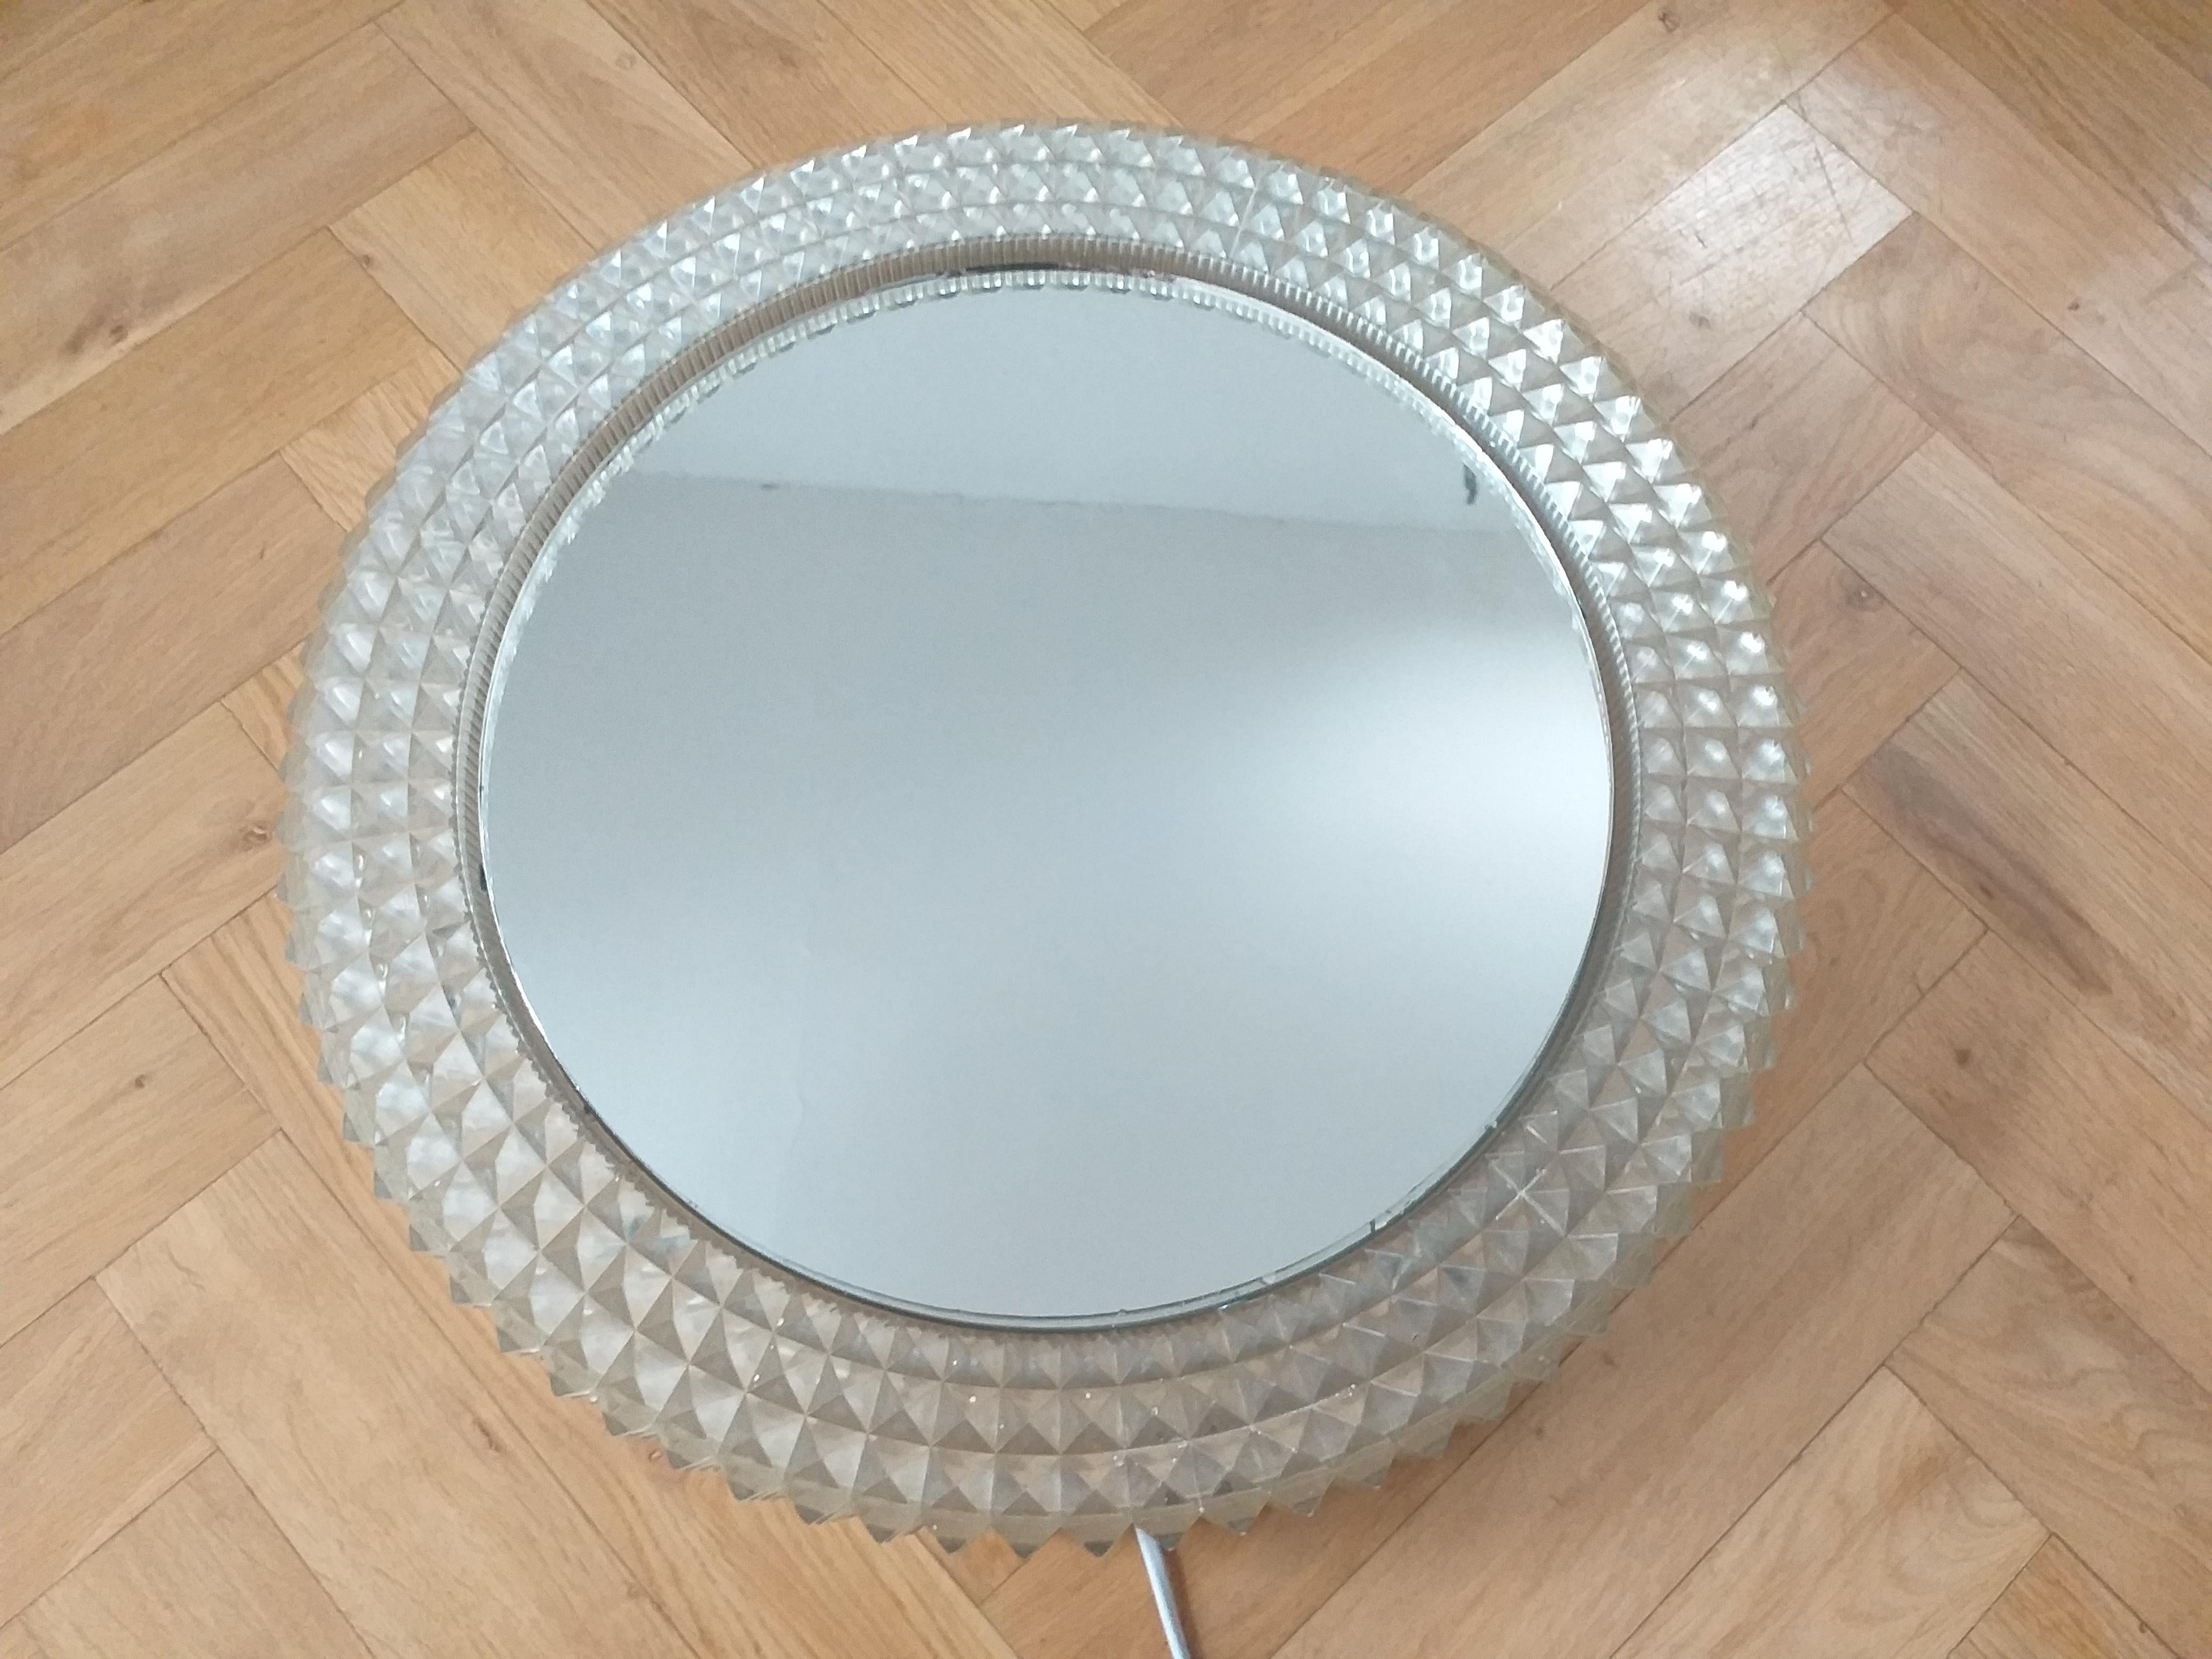 - Very beautiful style of lighting
- Marked by label
- New mirror glass
- Schoninger.